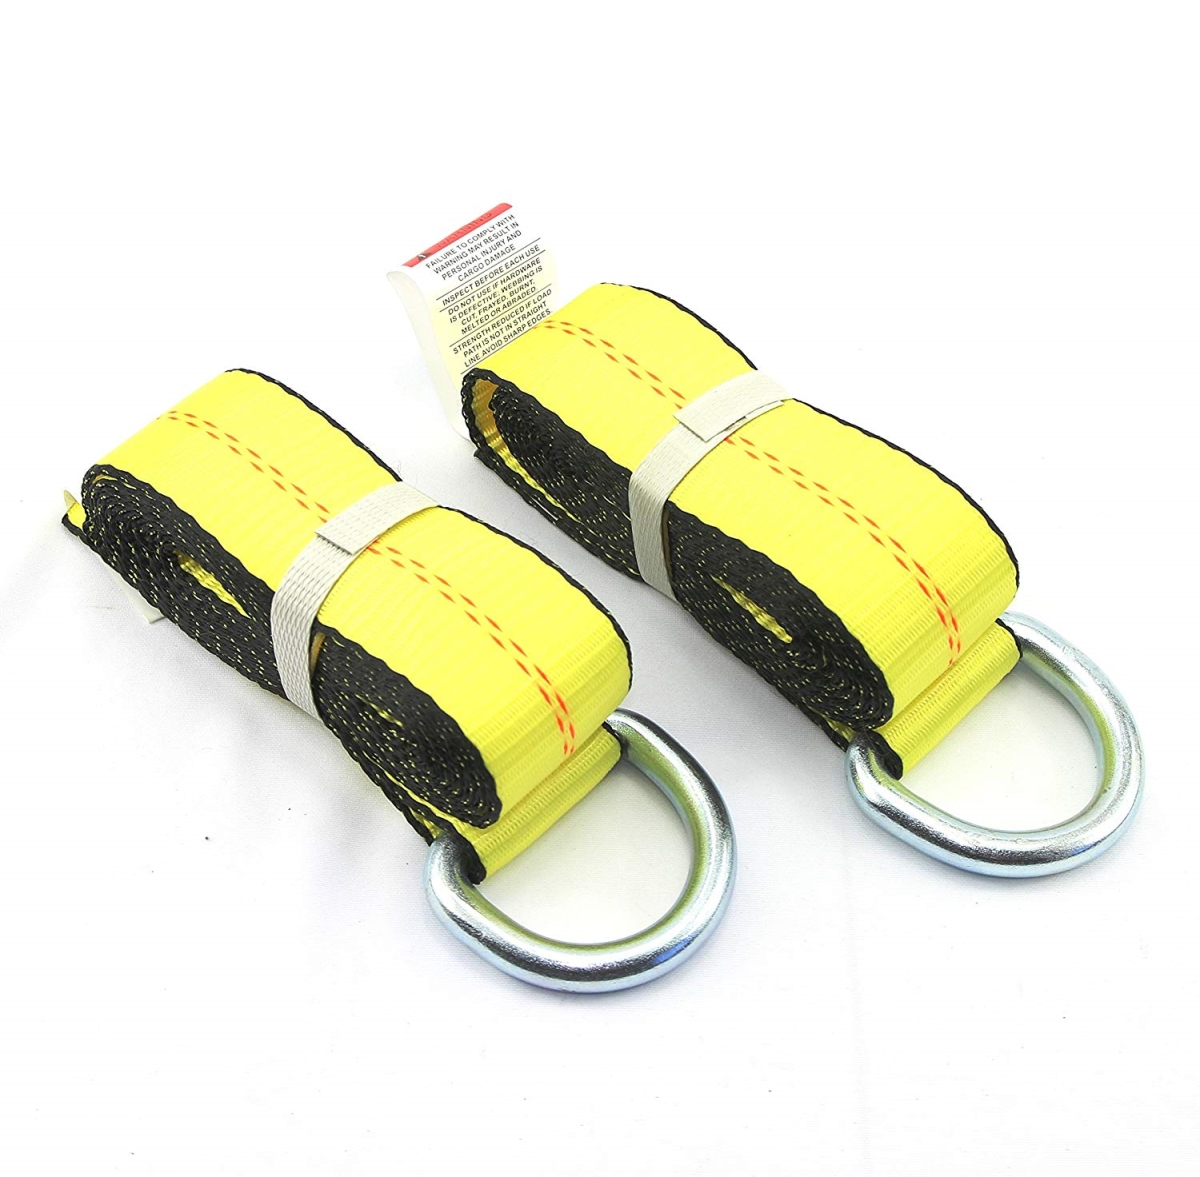 Tws21-2508-w9-4 2 In. X 8 Ft. Lasso Strap With O-ring - Yellow, 4 Piece